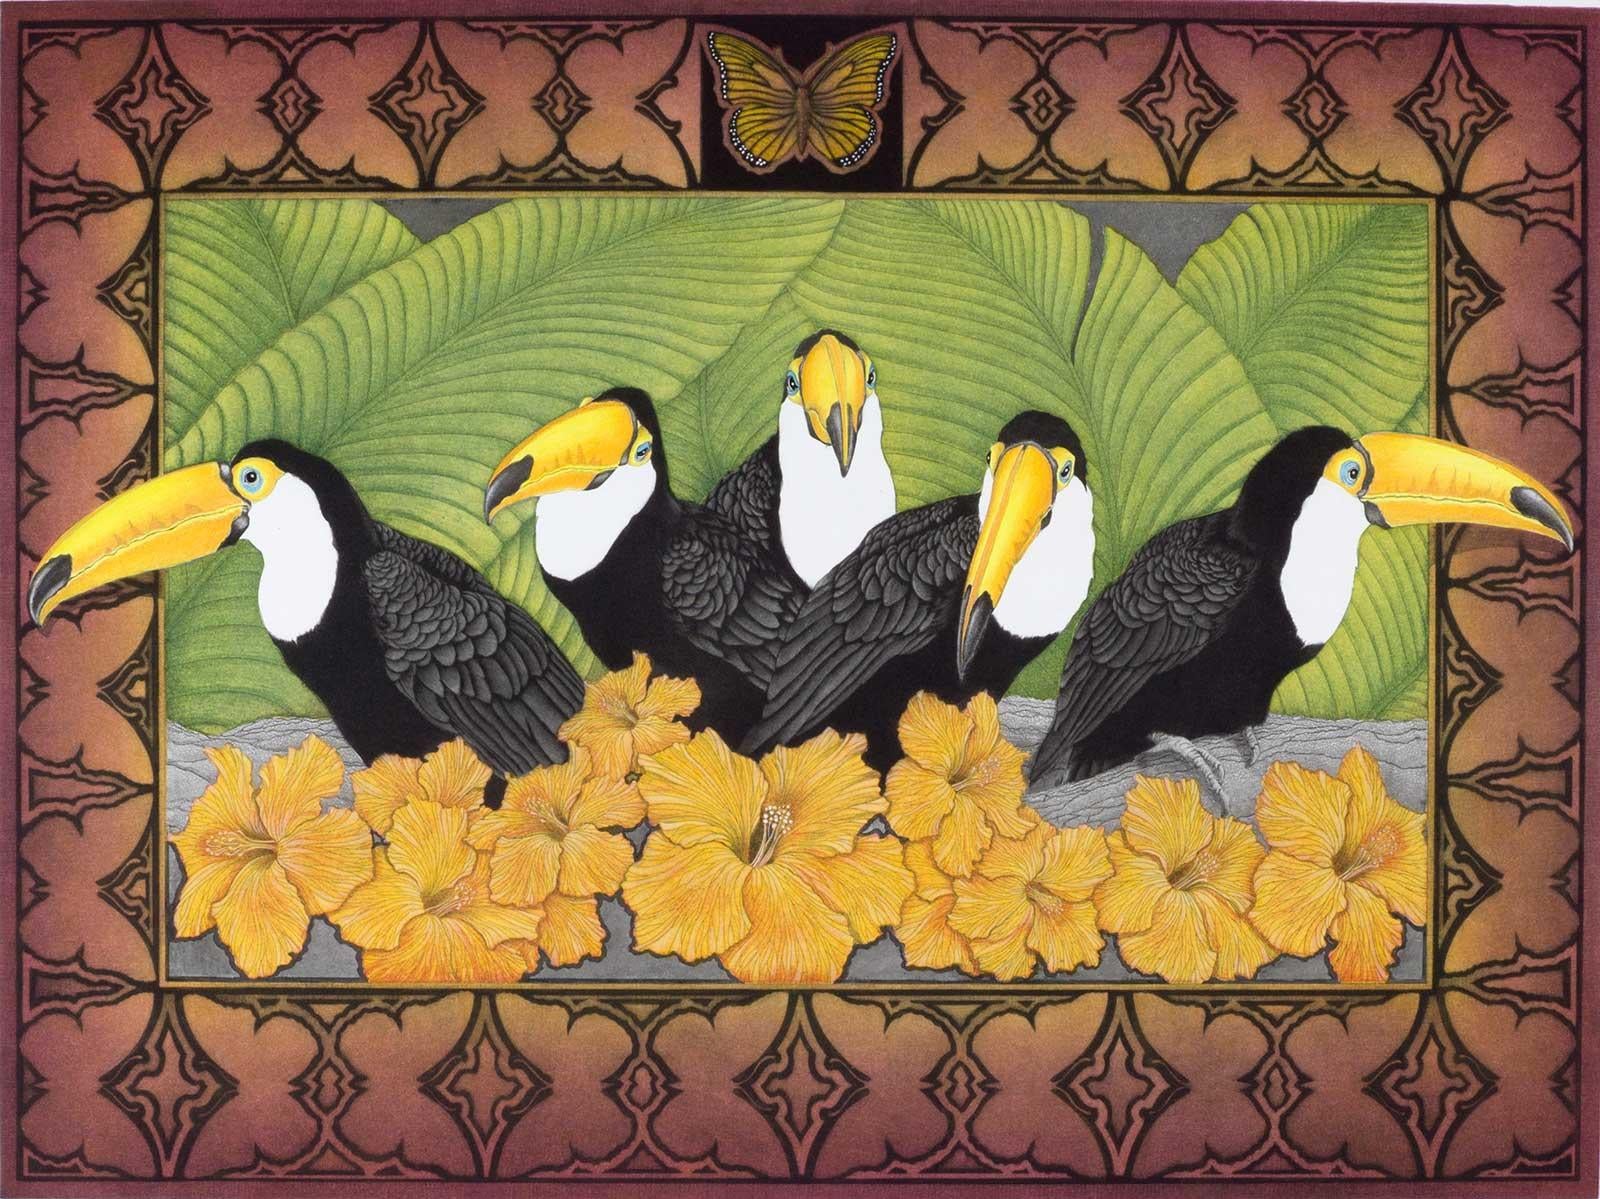 Sharon Augusta Mitchell Animal Print - Rainforest Tapestry(colorful image of birds, ferns and flowers found in tropics)